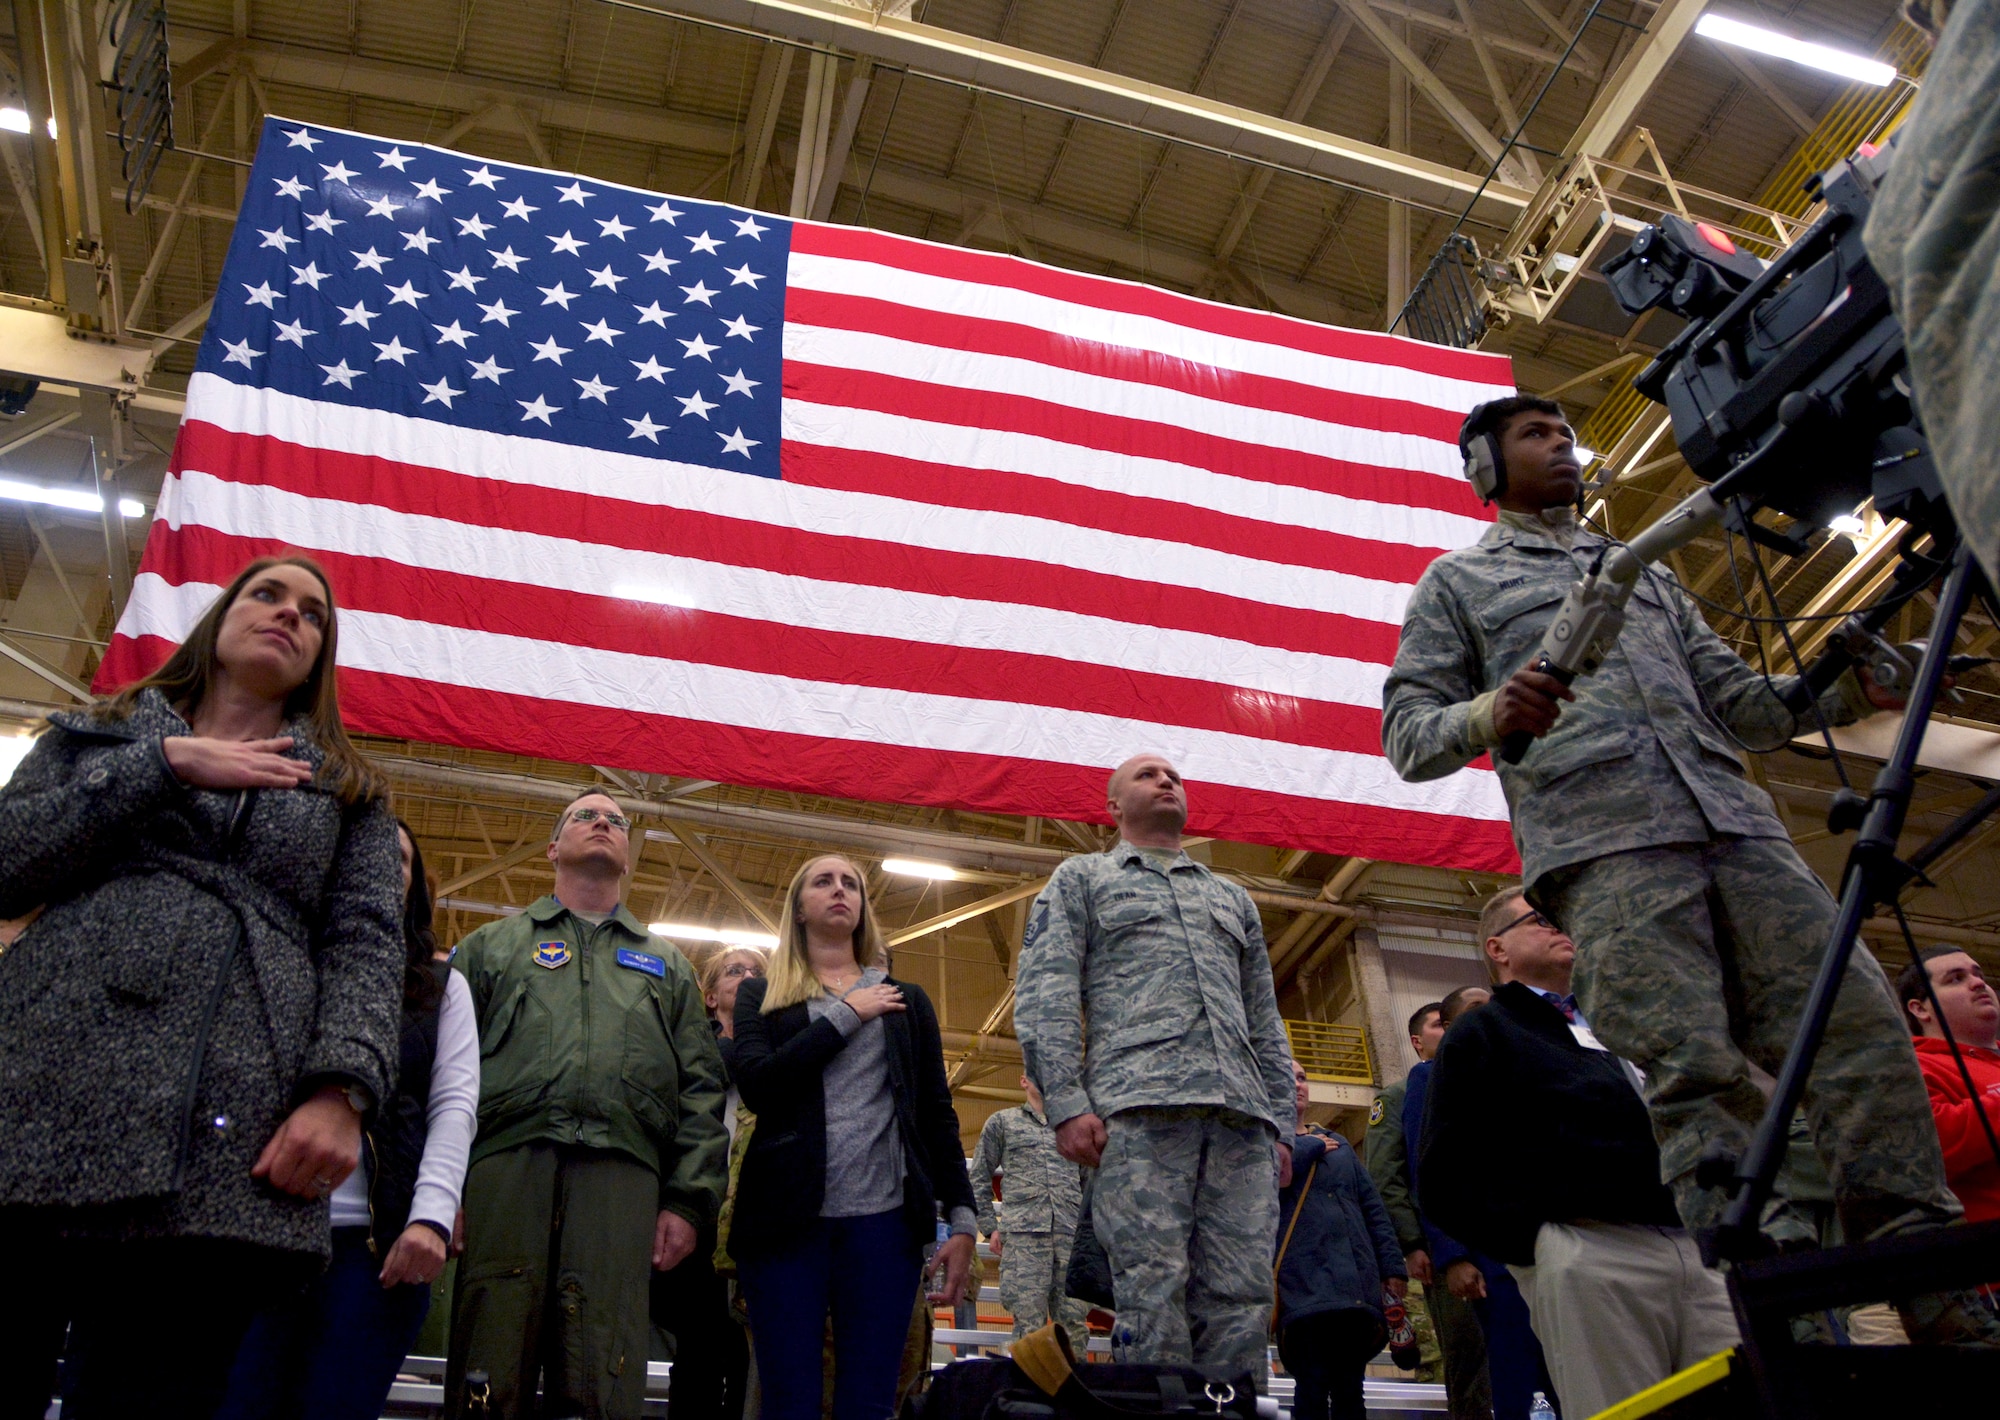 Guests of the KC-46A Pegasus arrival celebration stand during the national anthem at Altus Air Force Base, Oklahoma, Feb. 8, 2019. The KC‐46A provides improved capabilities over older Air Force air refueling aircraft to include boom and drogue refueling on the same sortie, a refueling capability of more than 212,000 pounds of fuel and palletized cargo up to 65,000 pounds, depending on fuel storage configuration. (U.S. Air Force photo by Tech. Sgt. Samantha Mathison)